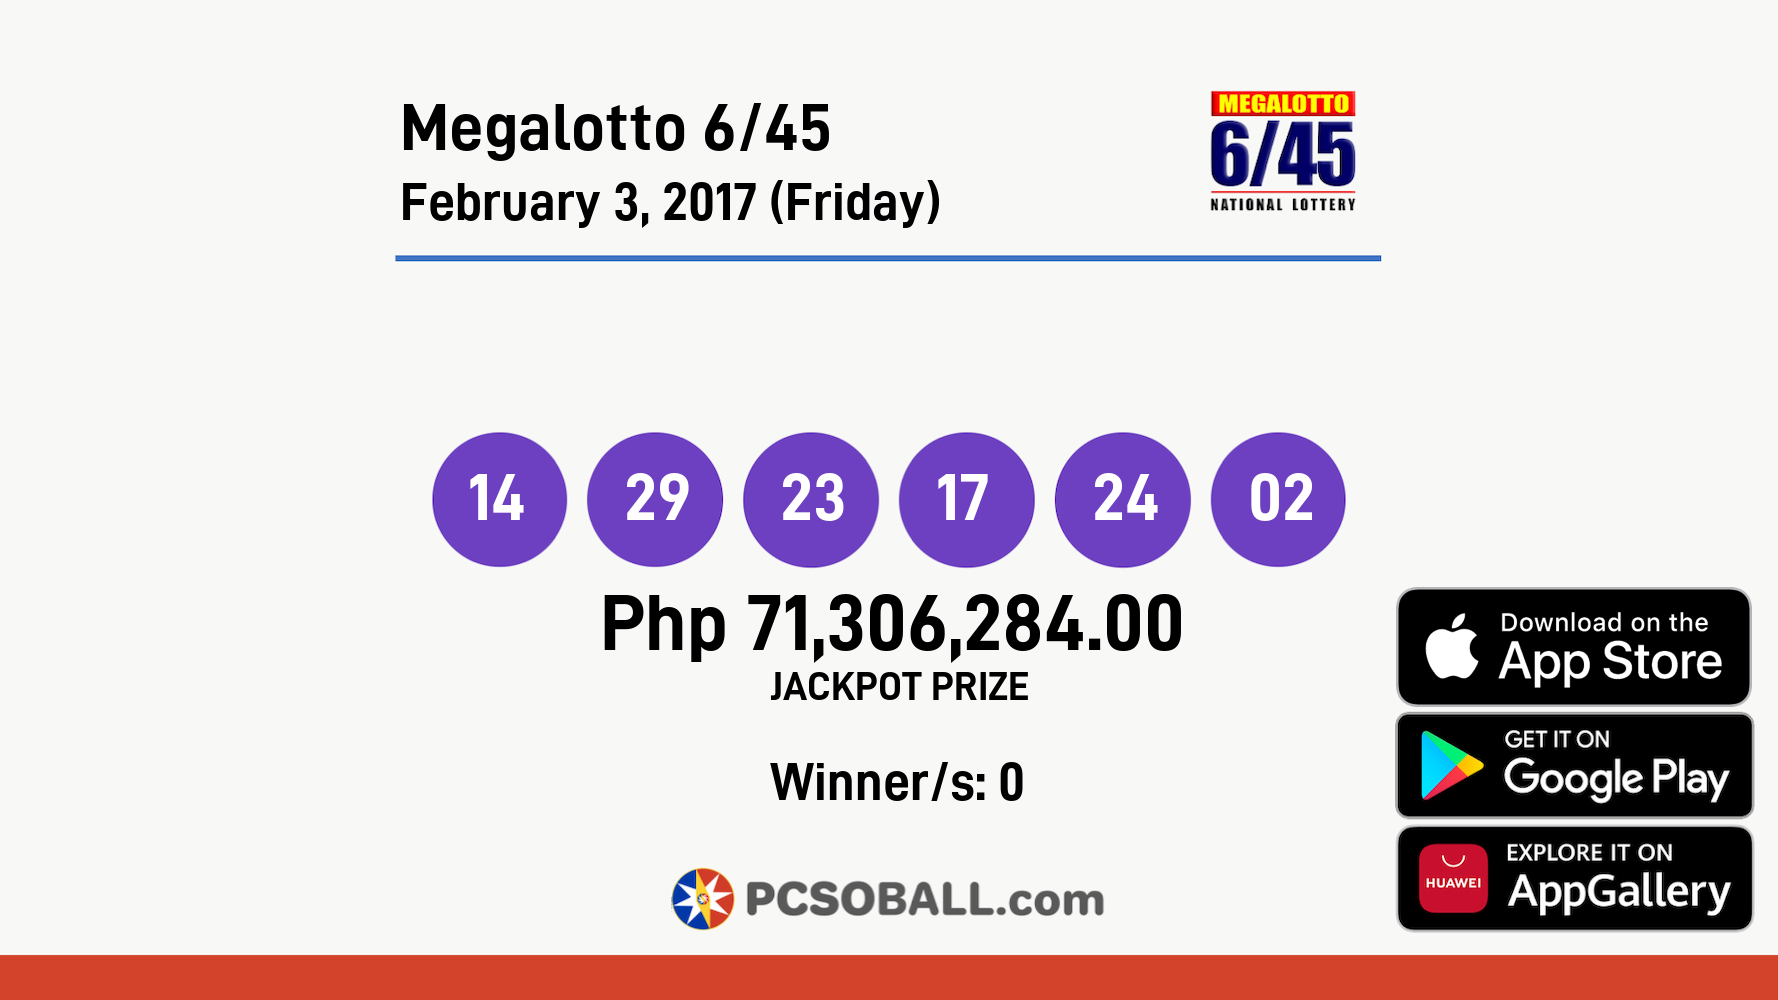 Megalotto 6/45 February 3, 2017 (Friday) Result